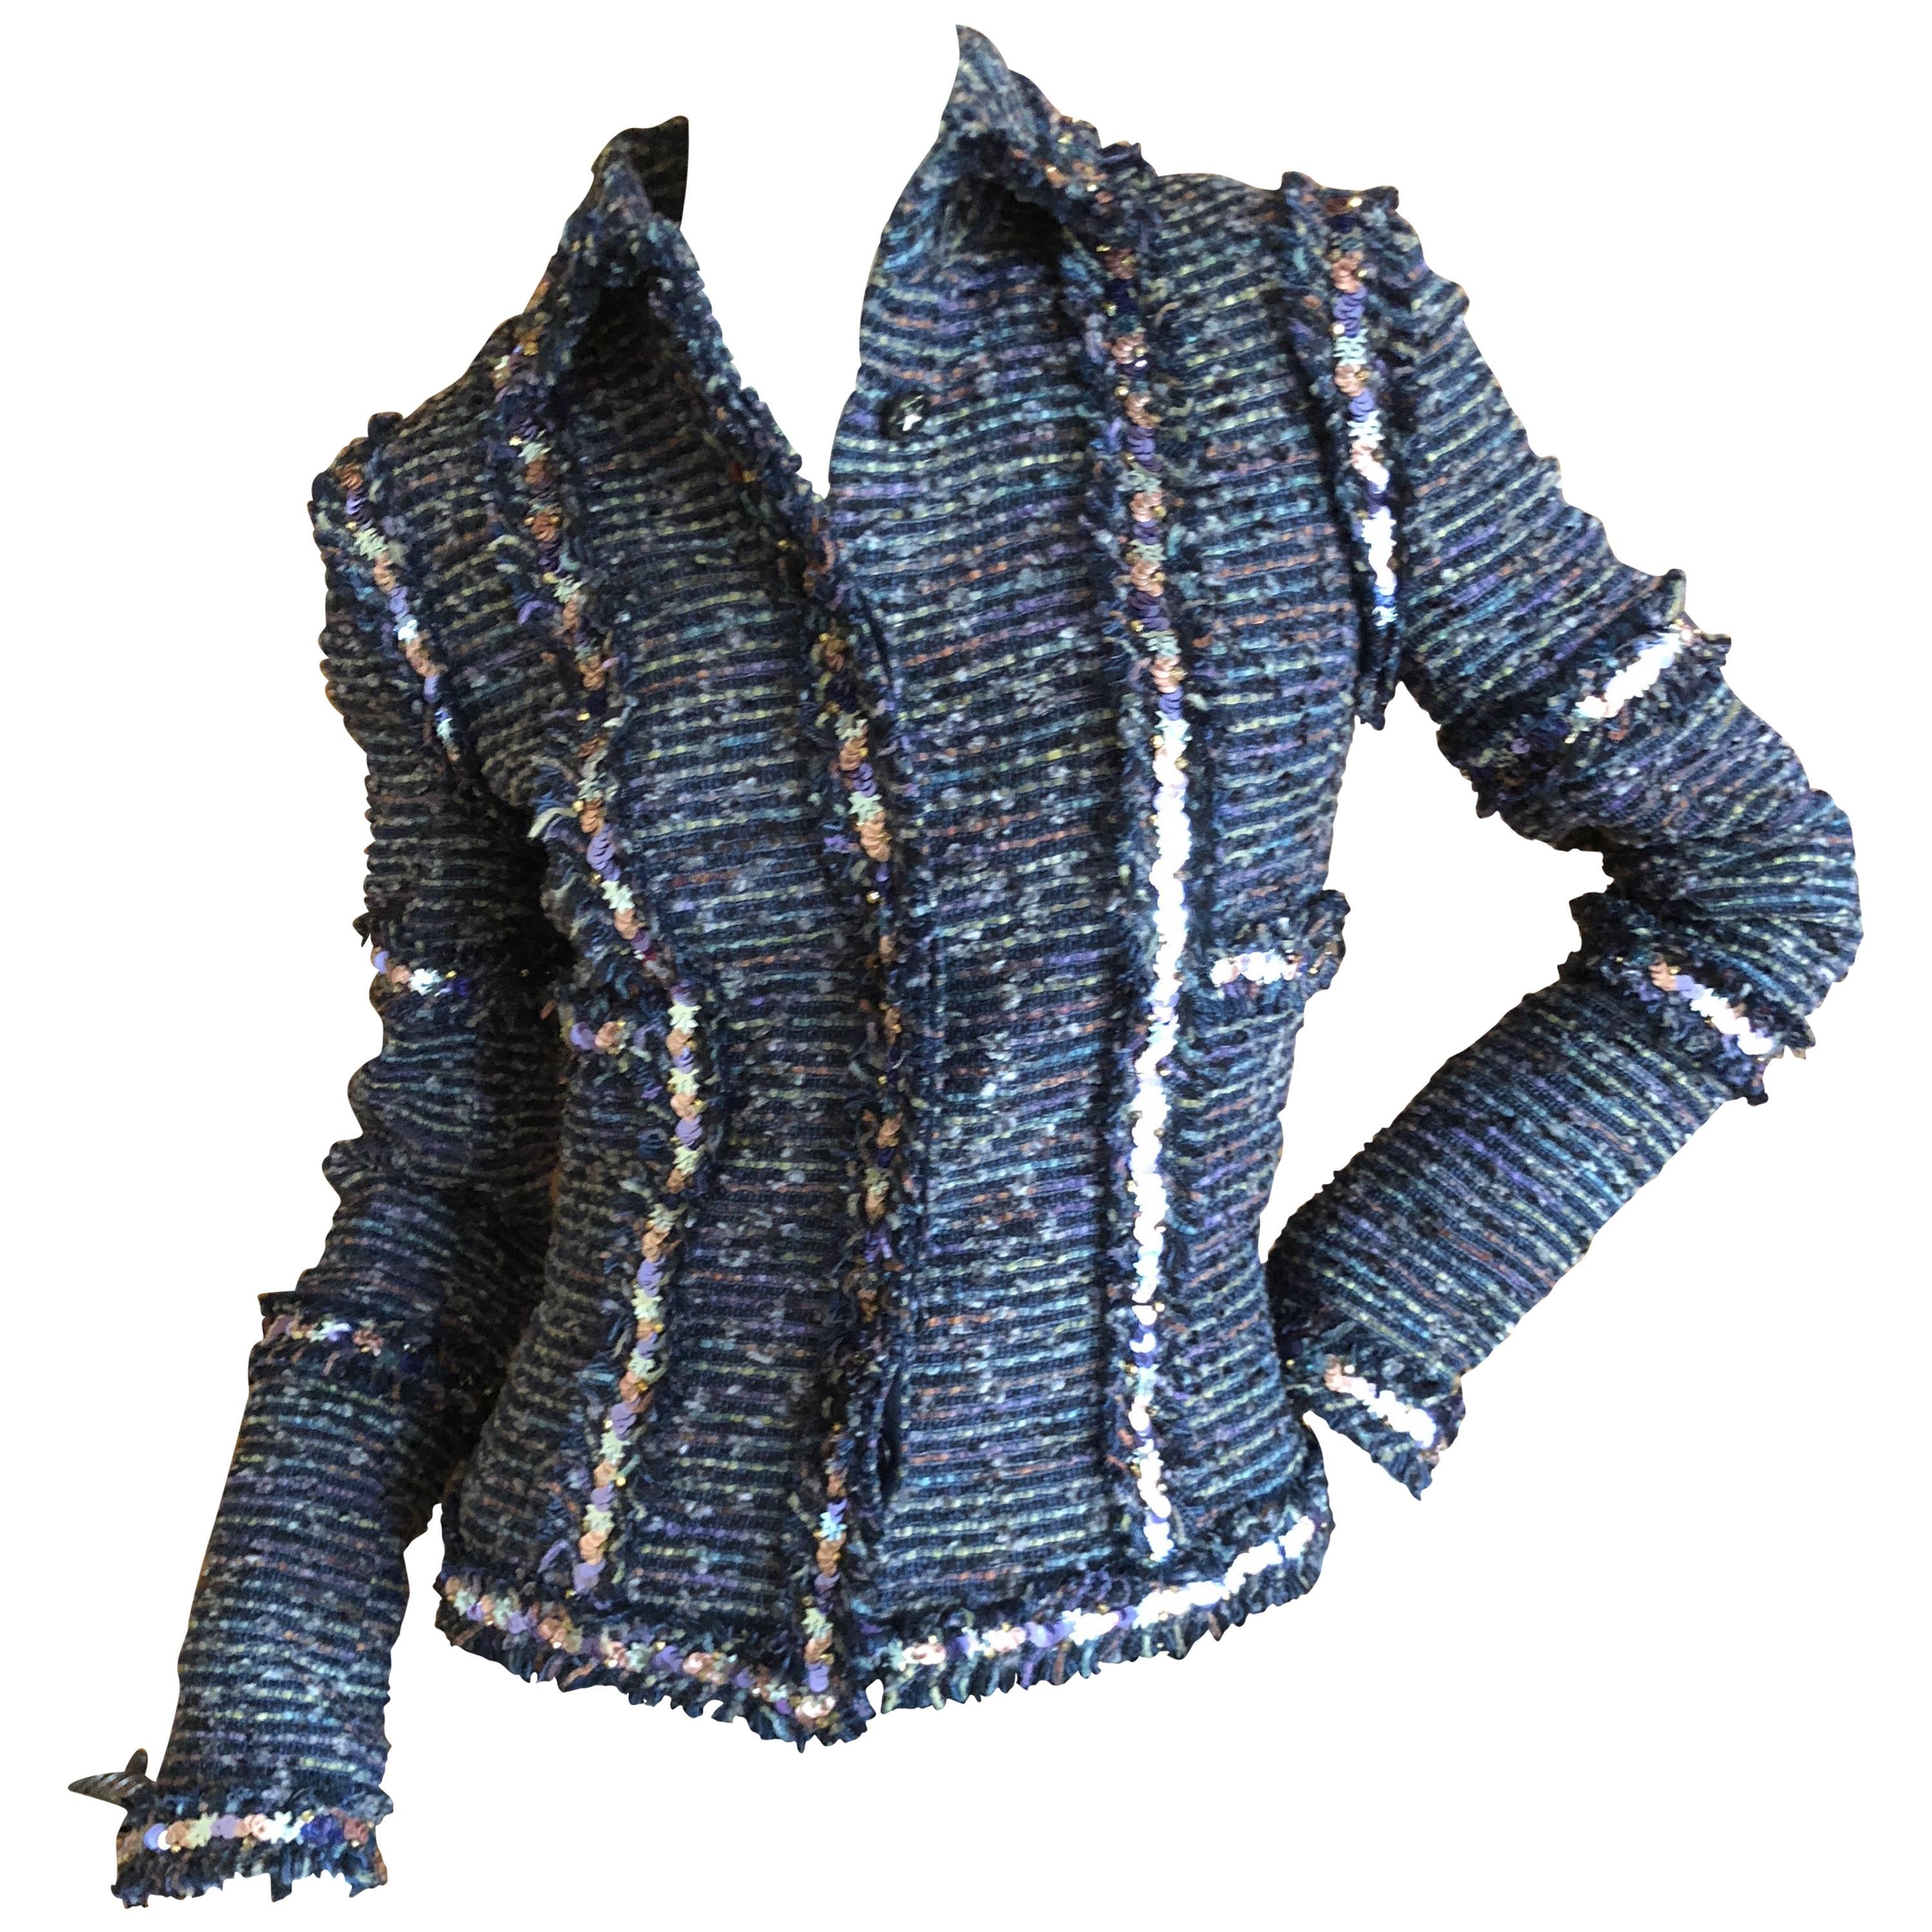 Chanel "Made in Paris" Fantasy Tweed Jacket with Sequin Accents, Fall 2005